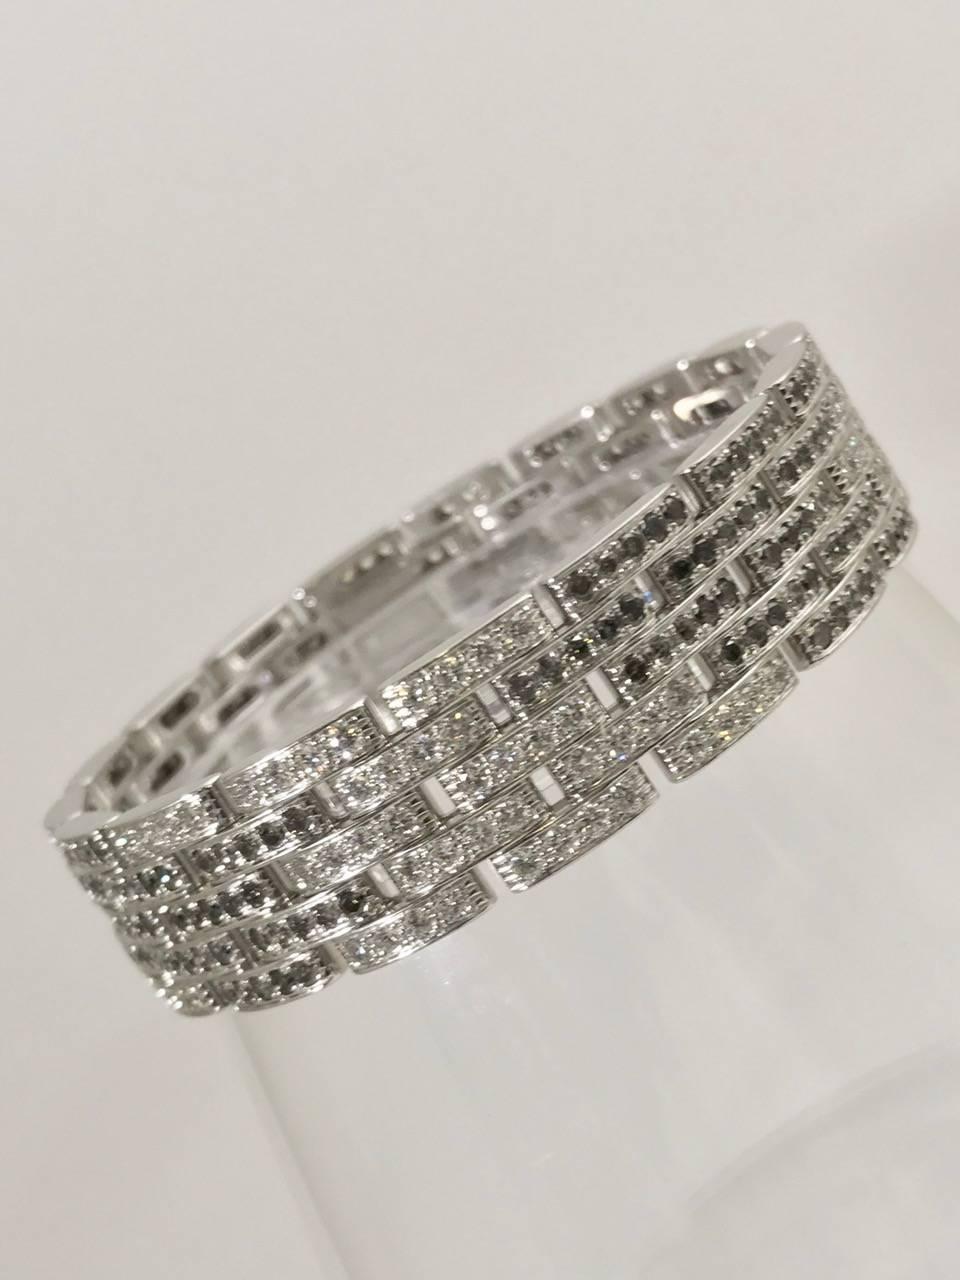 Rarely available with black and white diamonds, this Cartier Maillon Panthere bracelet is highly prized by connoisseurs of fine gems in general and Cartier in particular!  More commonly found with three rows, this 5 row stunner is instantly